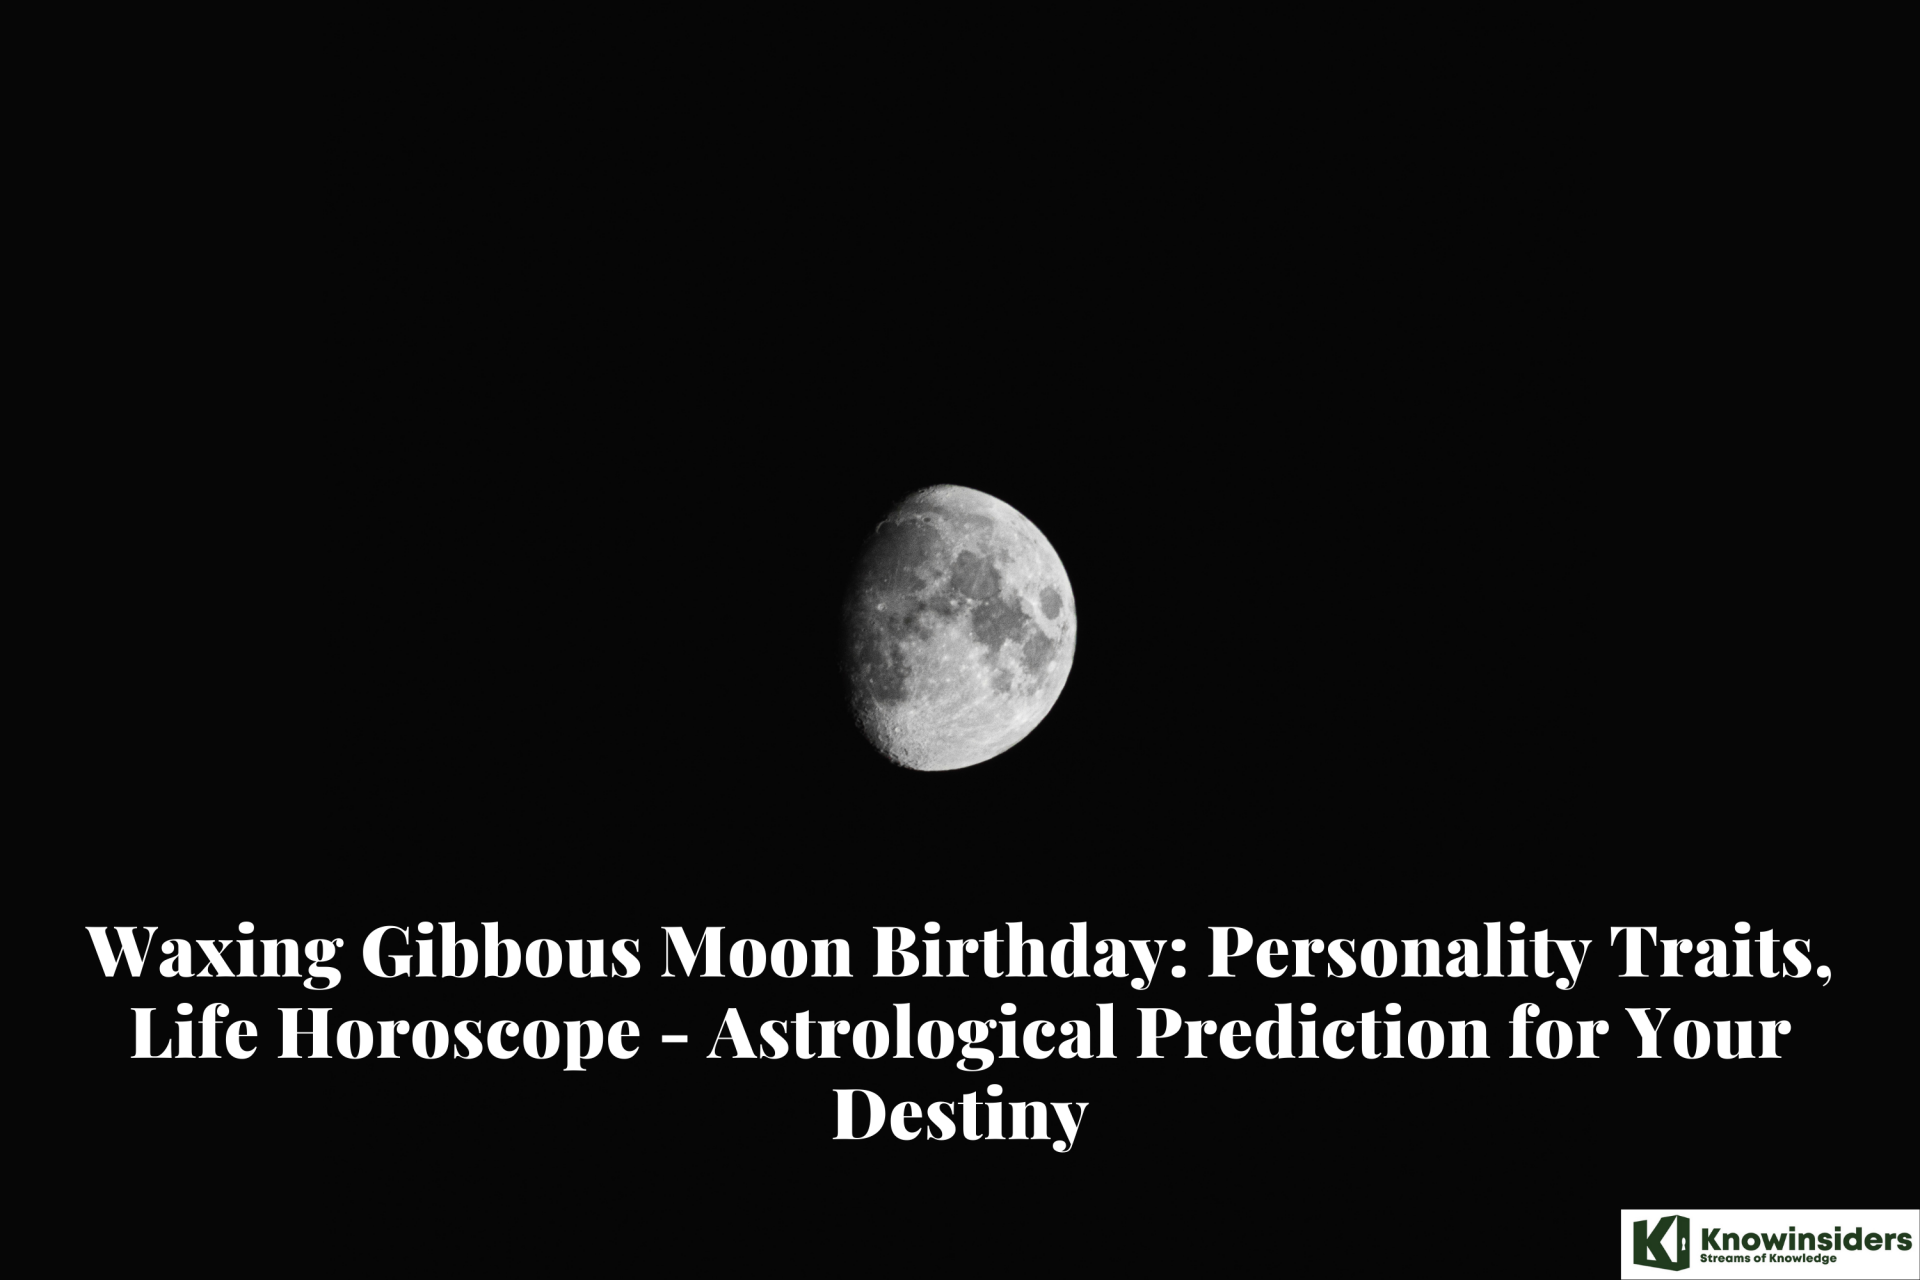 Waxing Gibbous Moon Birthday: Personality Traits, Life Horoscope - Astrological Prediction for Your Destiny